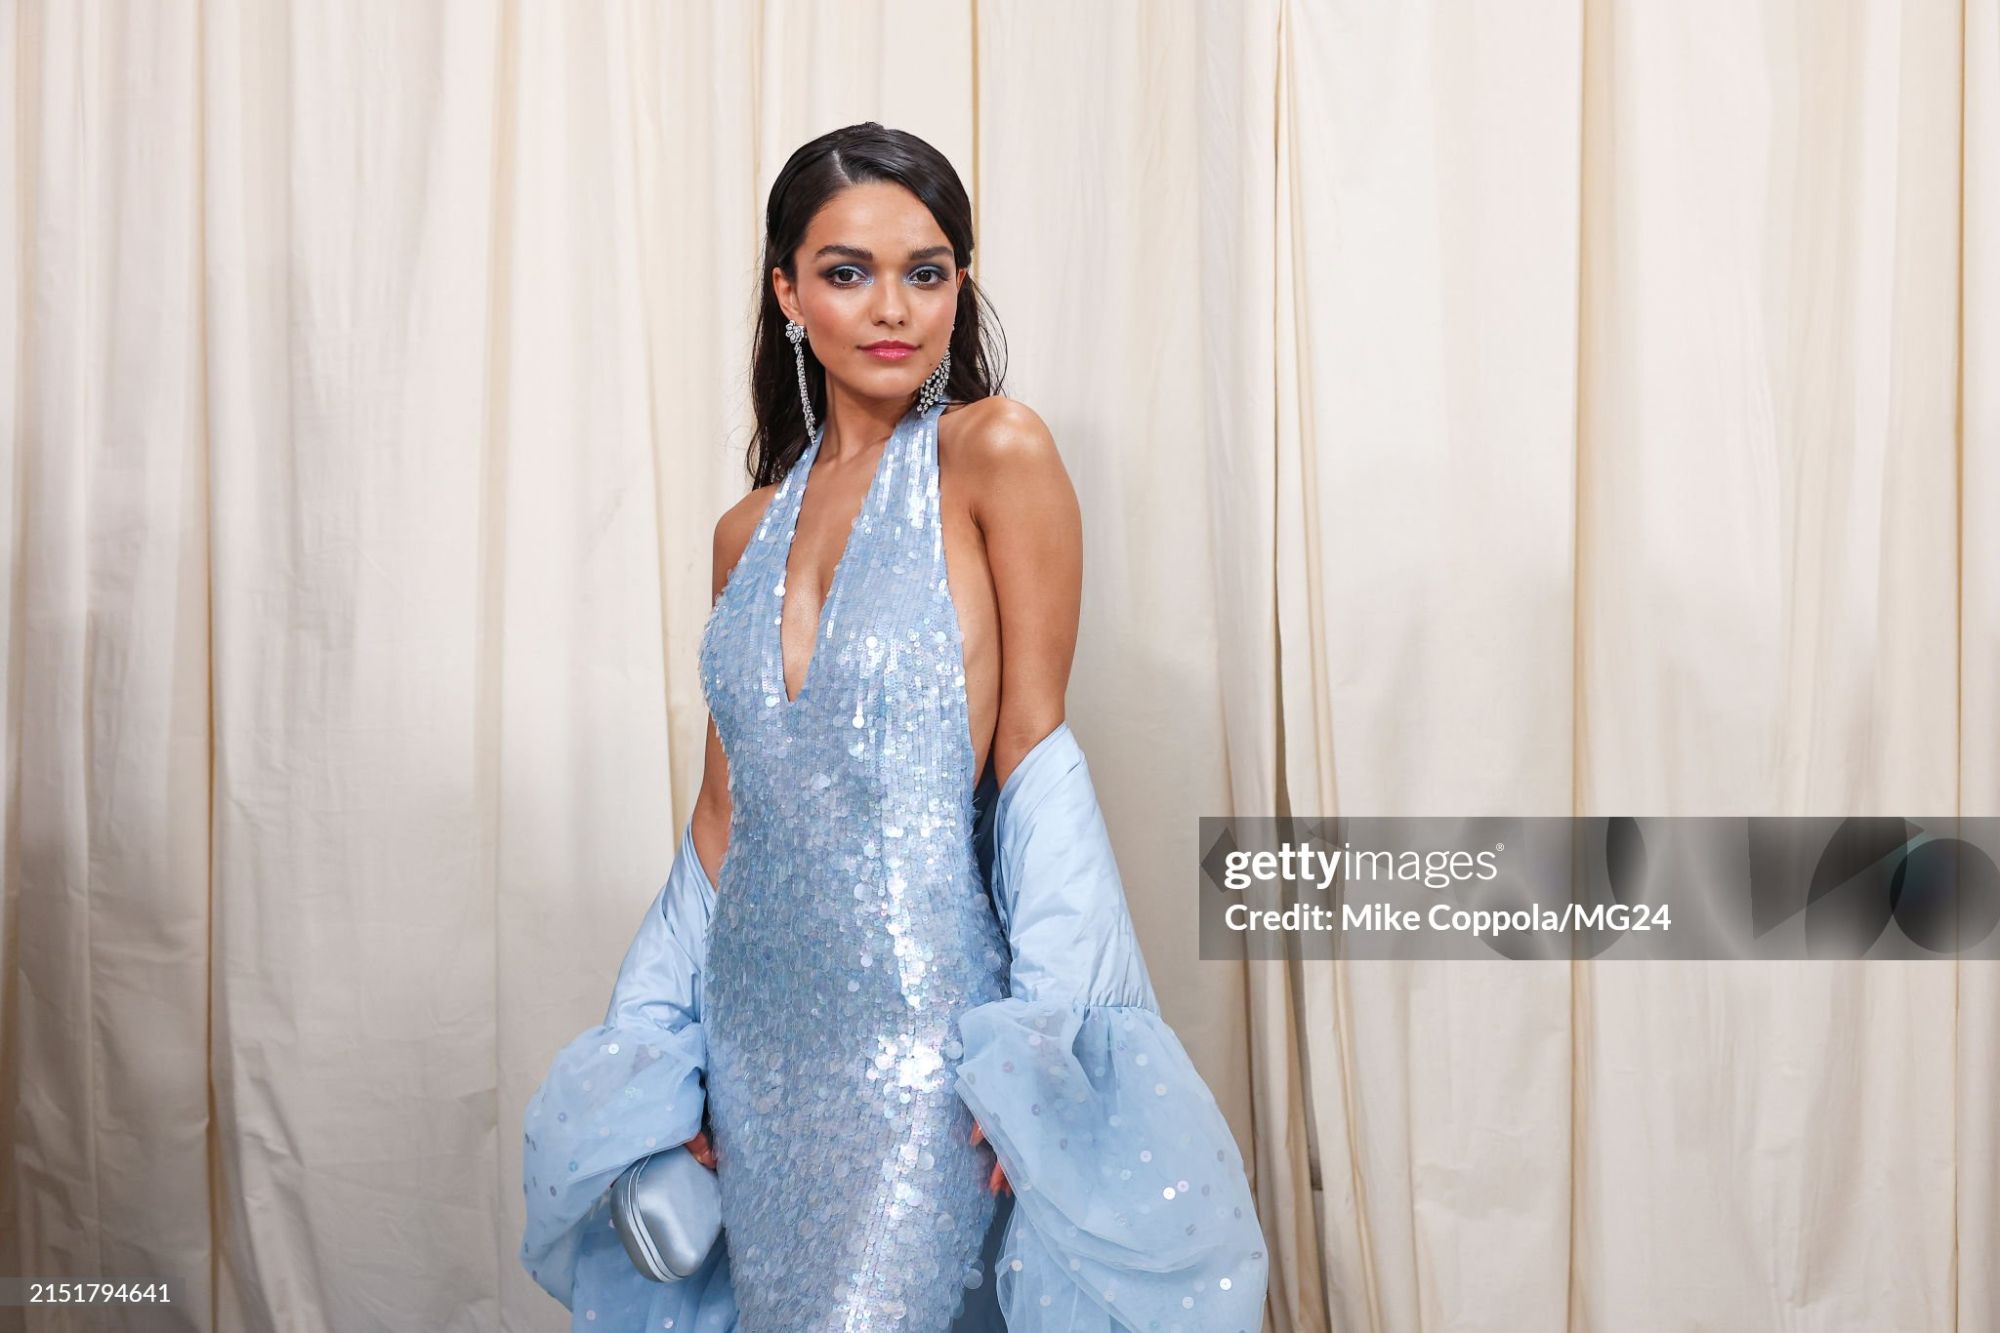 gettyimages-2151794641-2048x2048.jpg